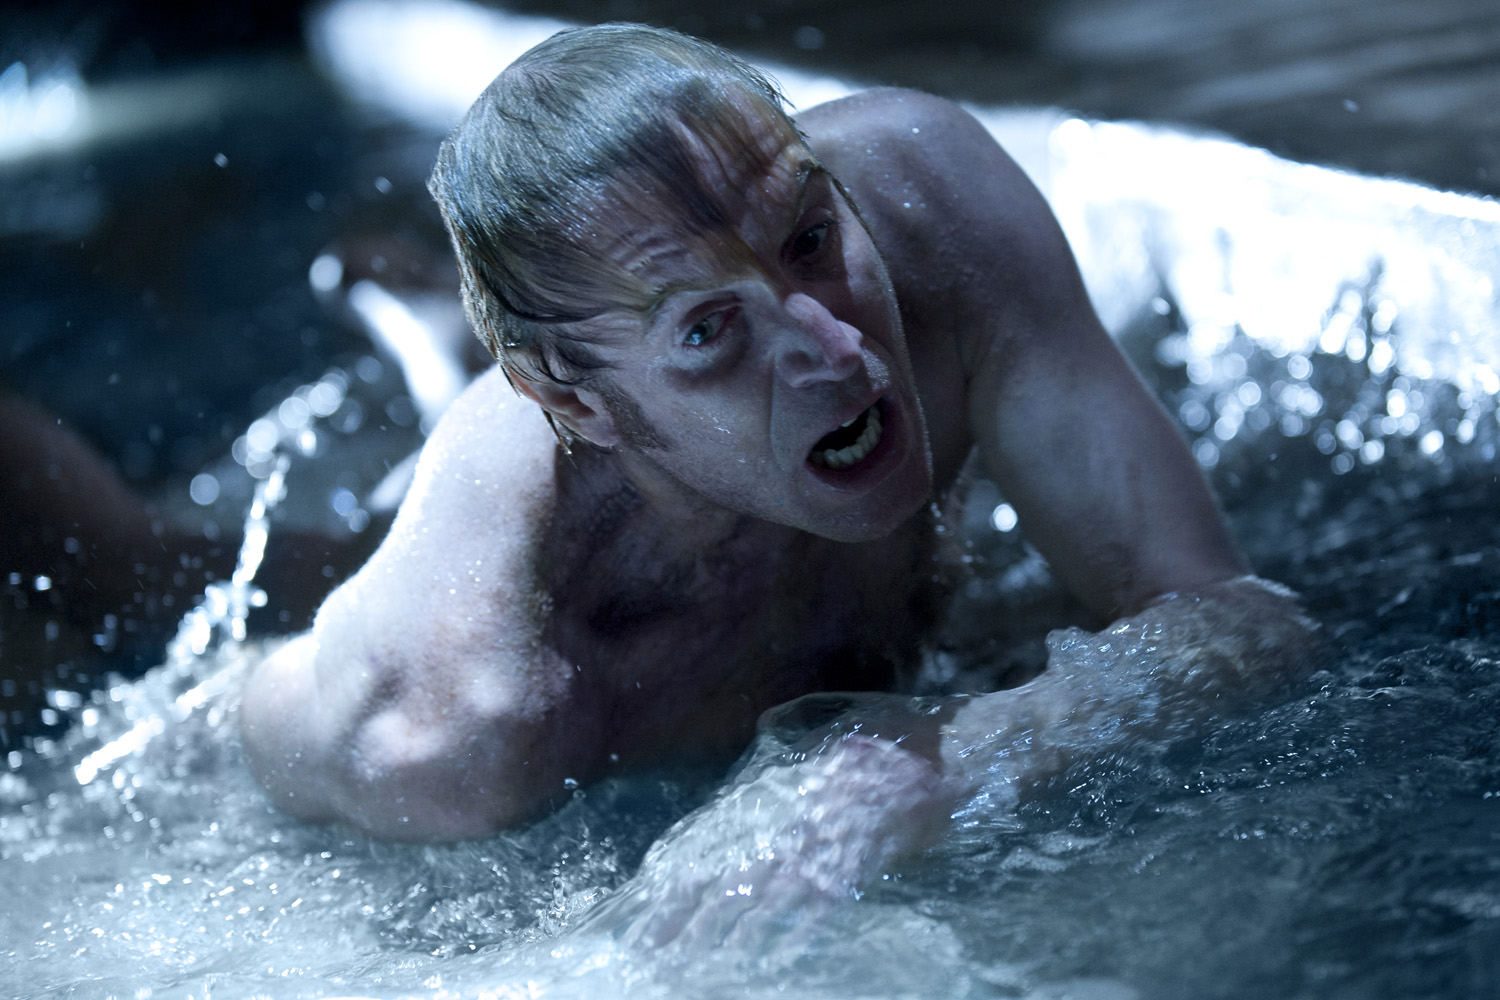 THAT’S DR. LIZARD TO YOU. Rhys Ifans manages to stay afloat  